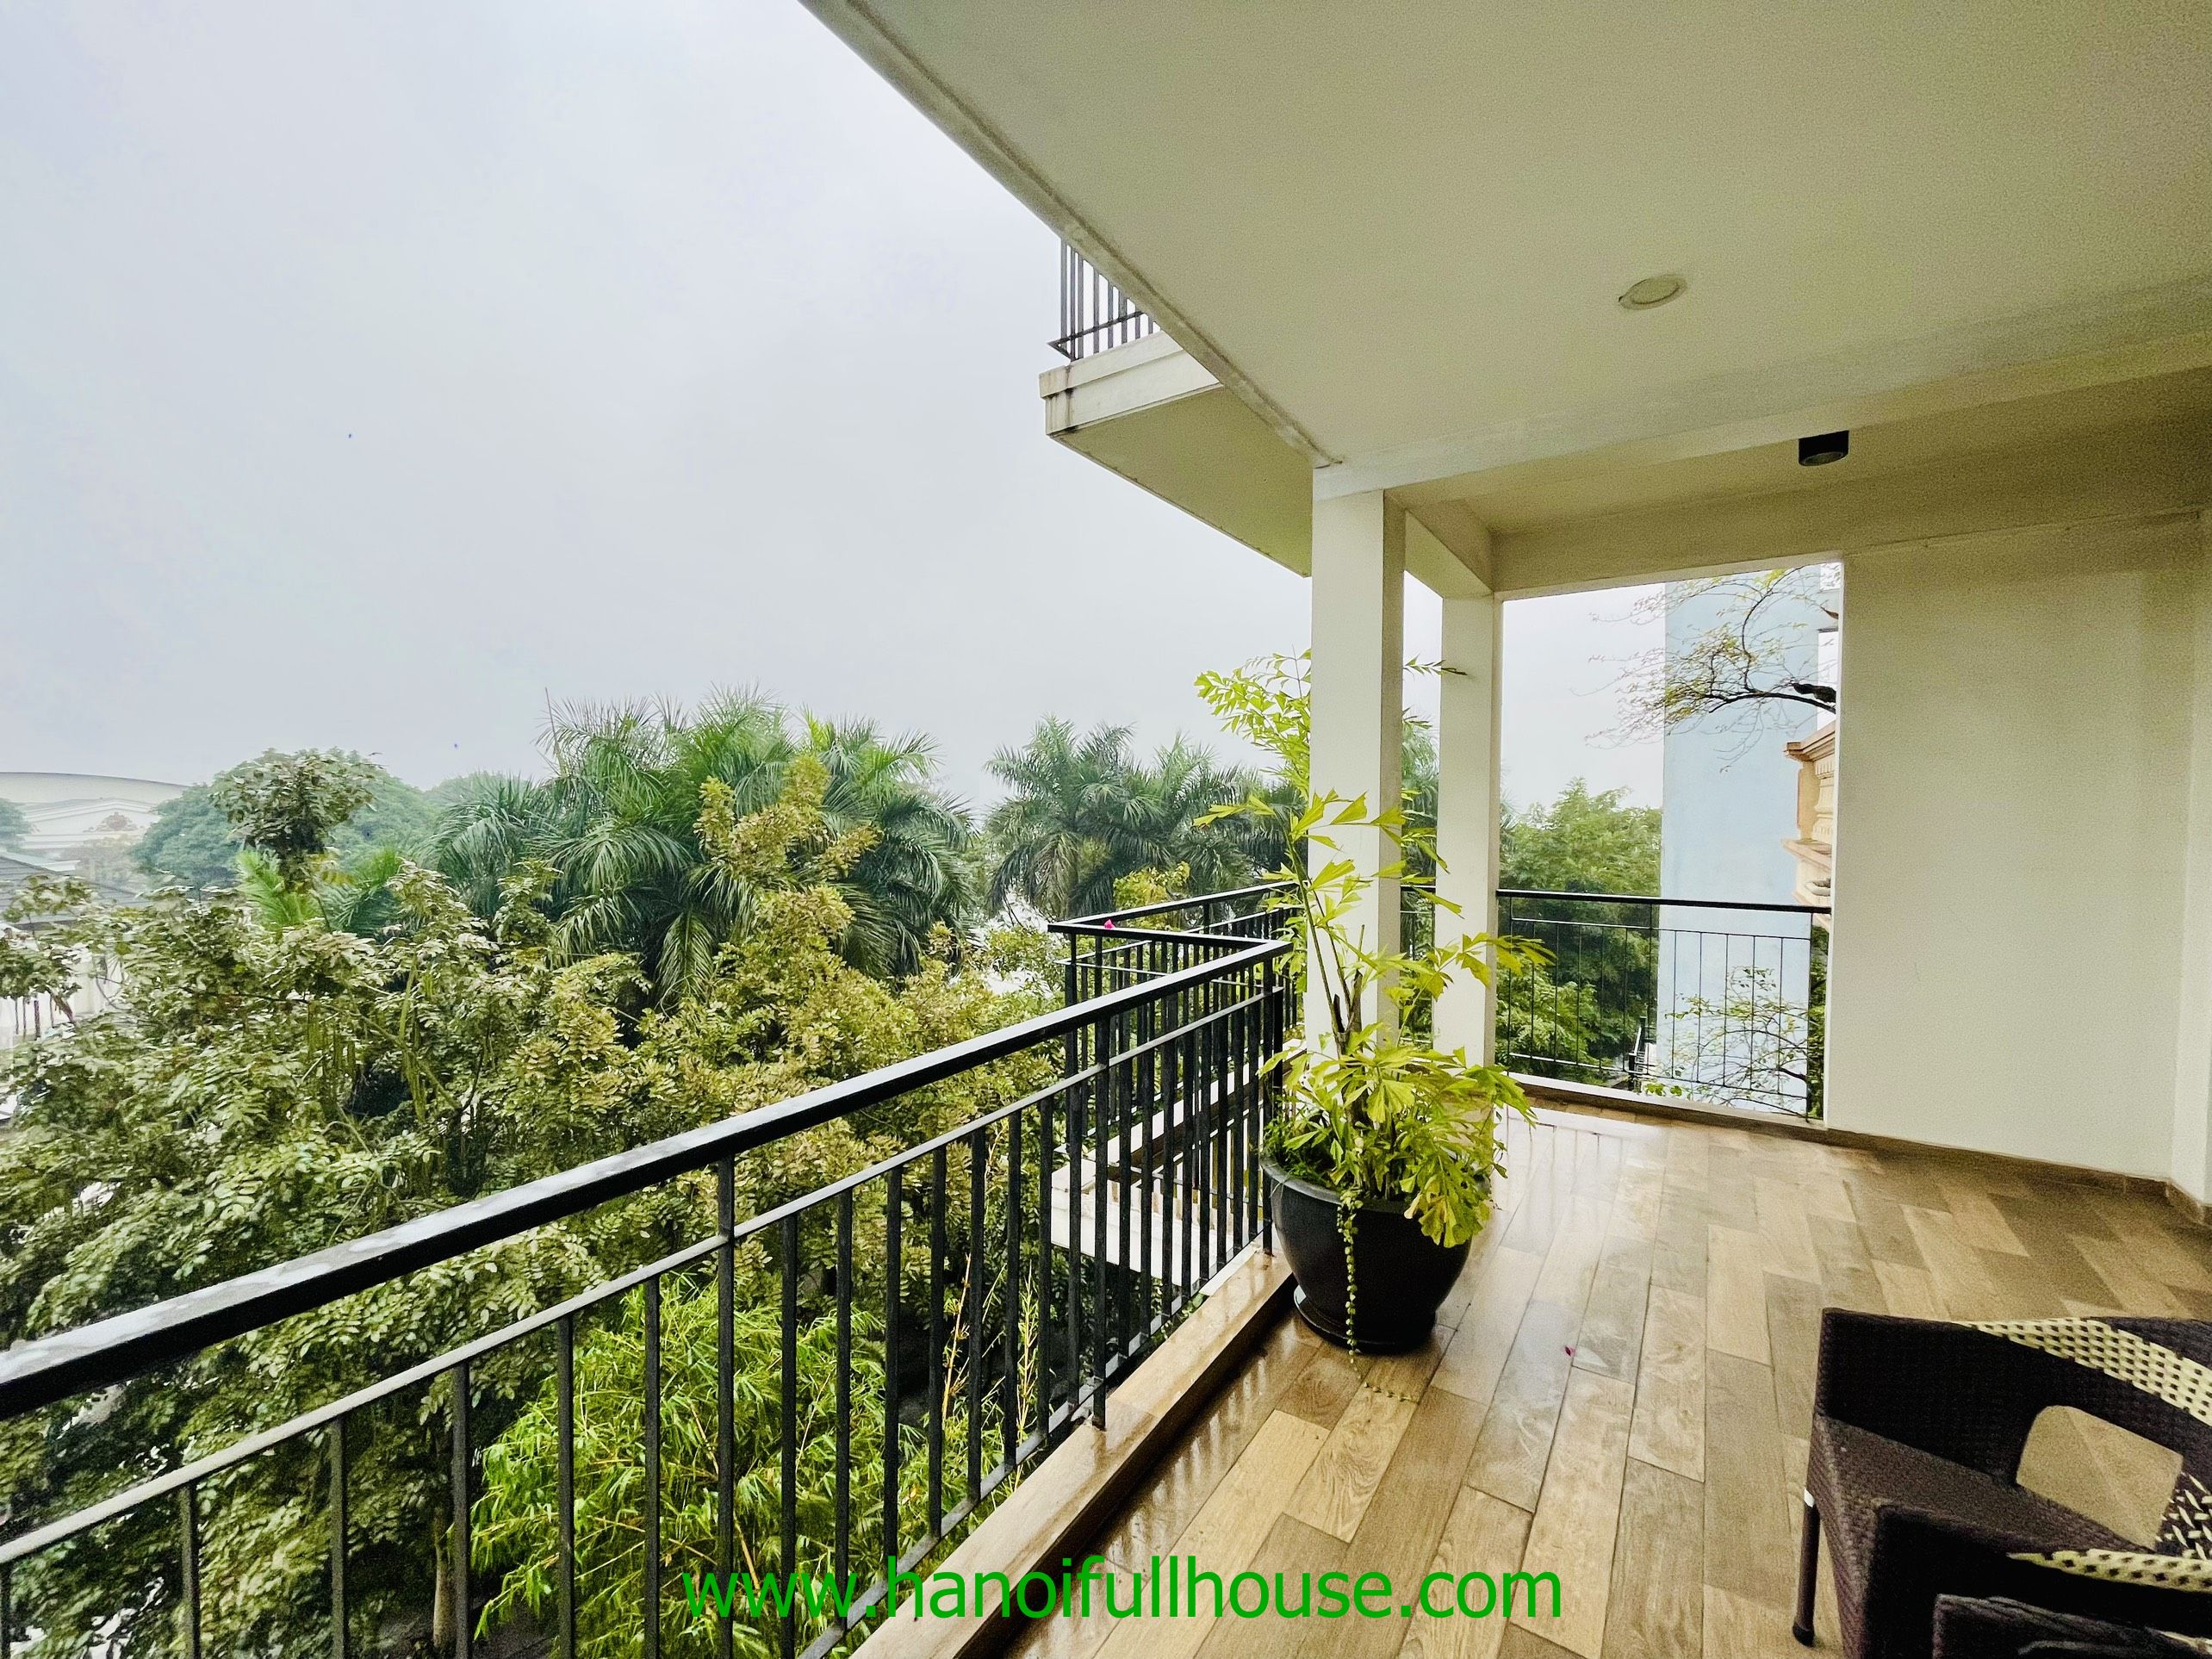 Renovated apartment with 2 bedrooms on Nhat Chieu street.